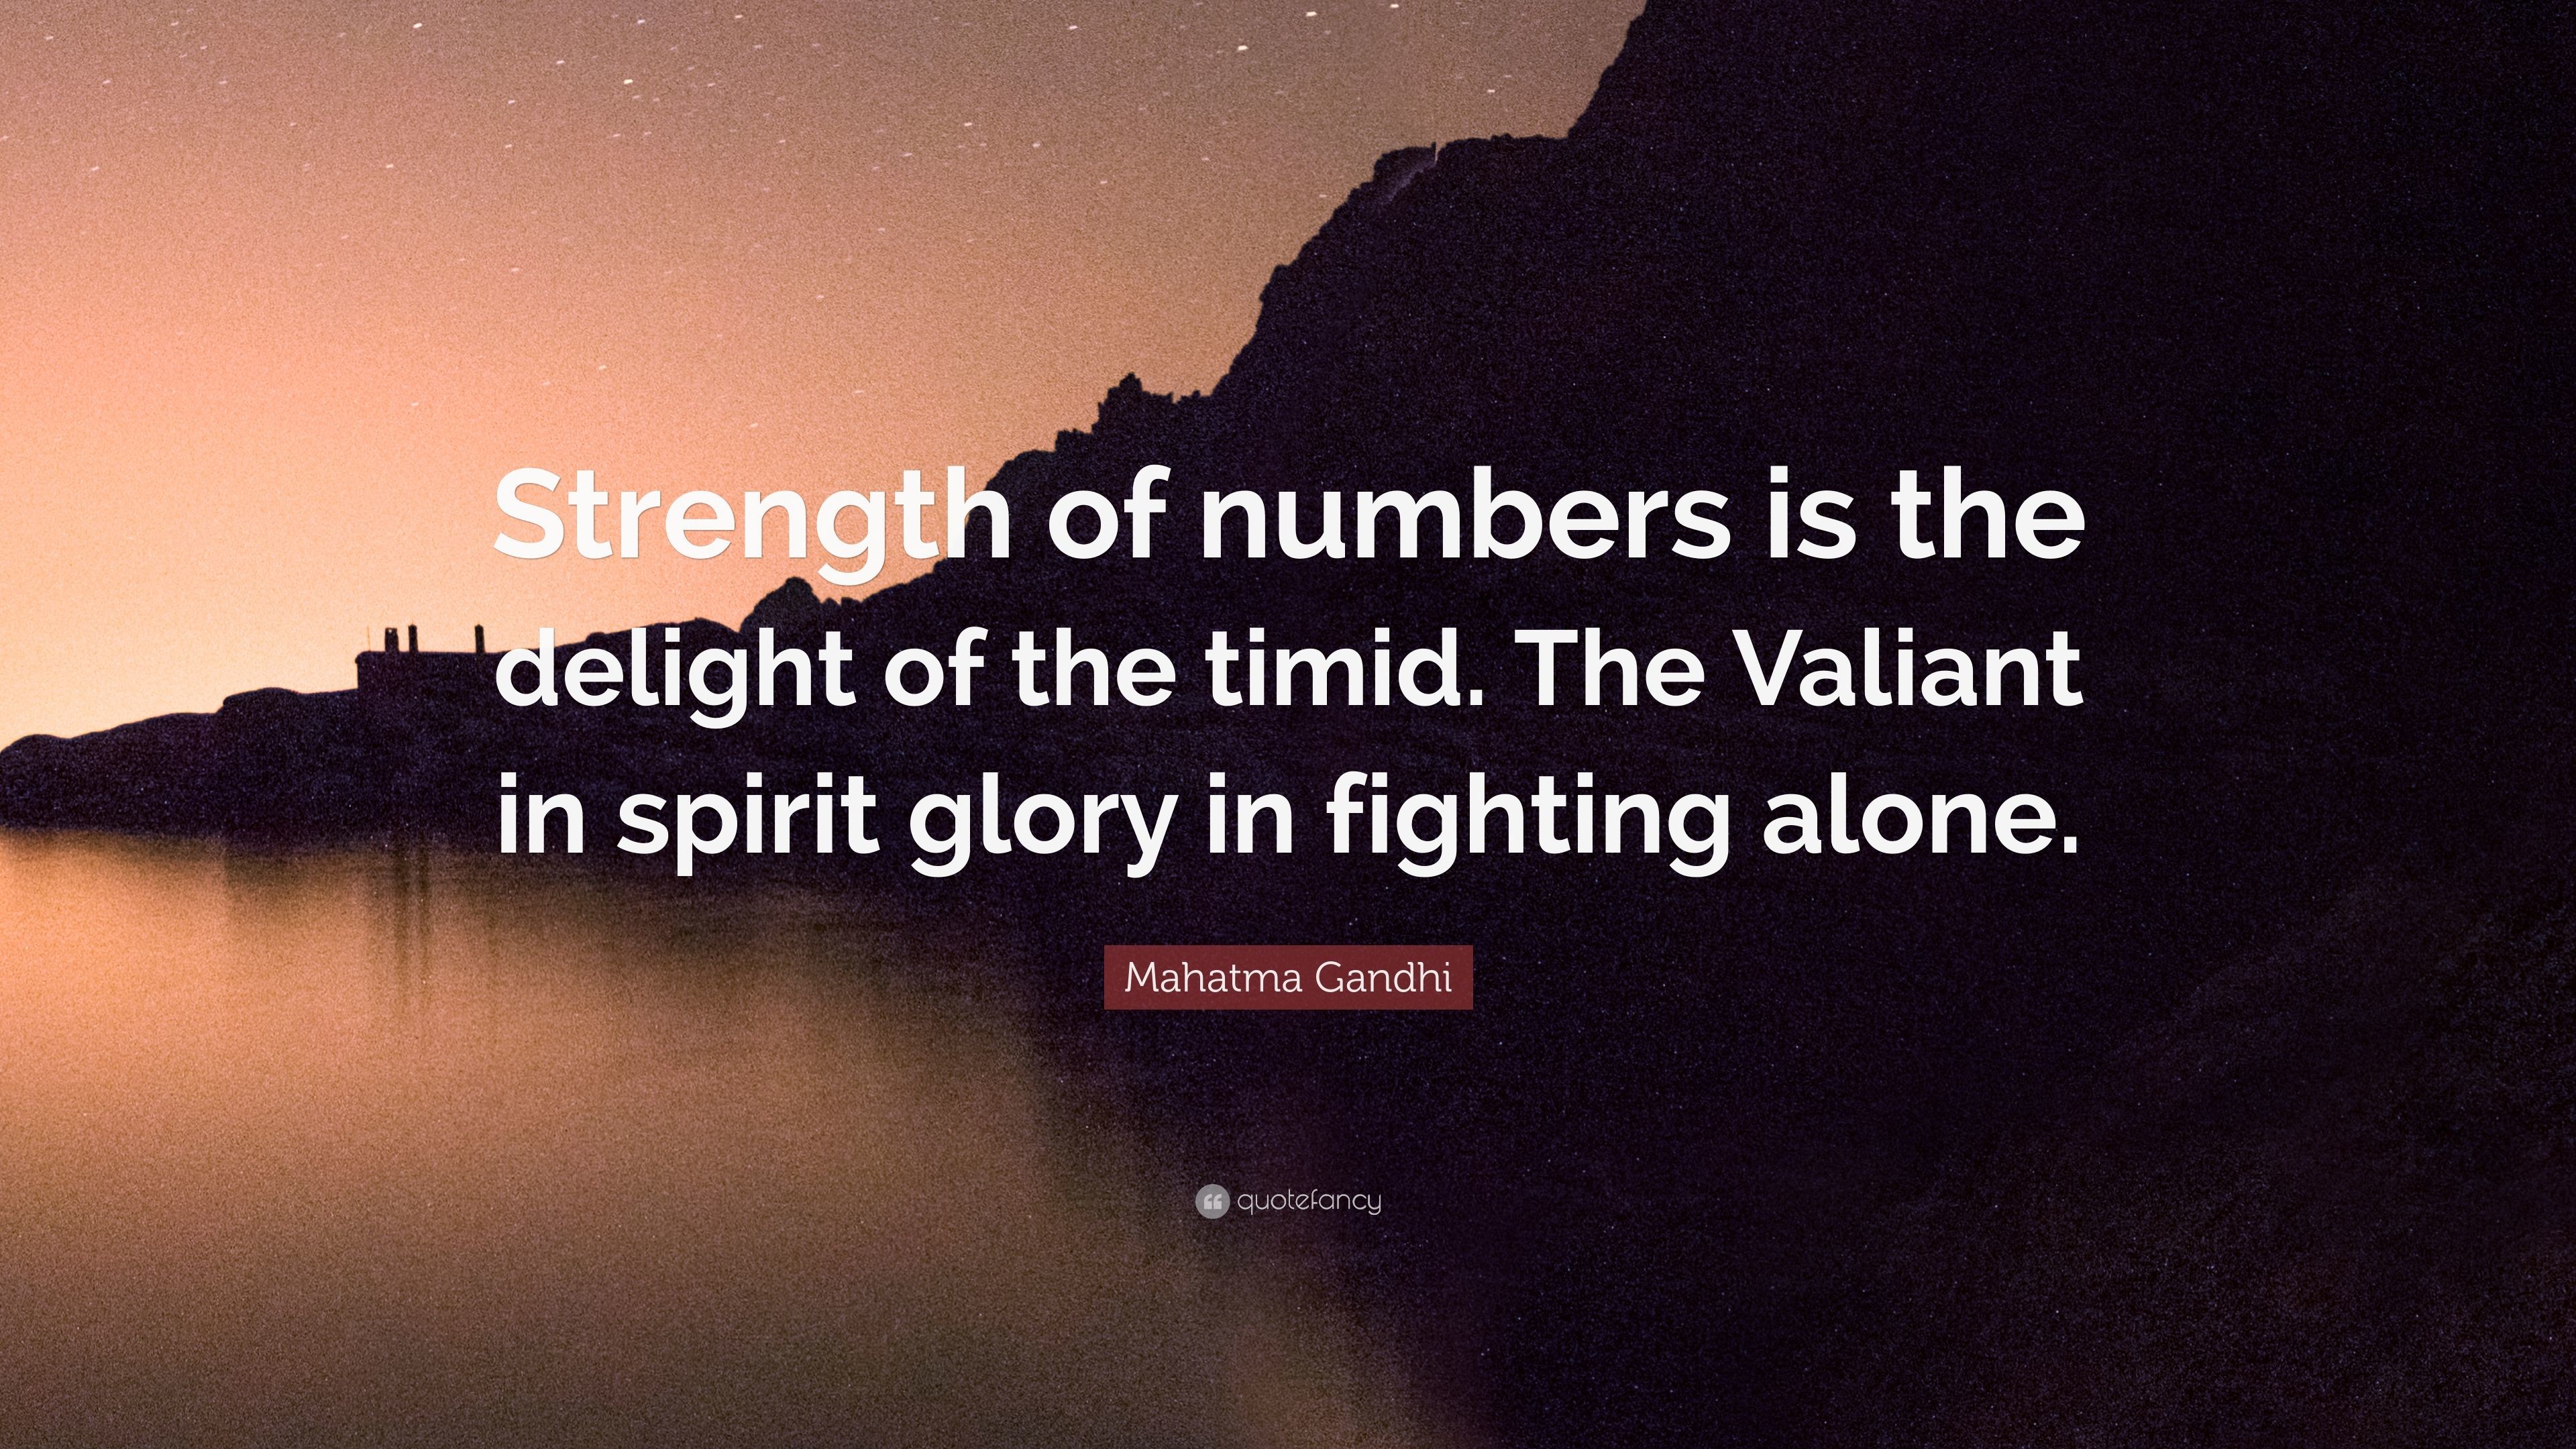 3840x2160 Mahatma Gandhi Quote: “Strength of numbers is the delight of the timid. The